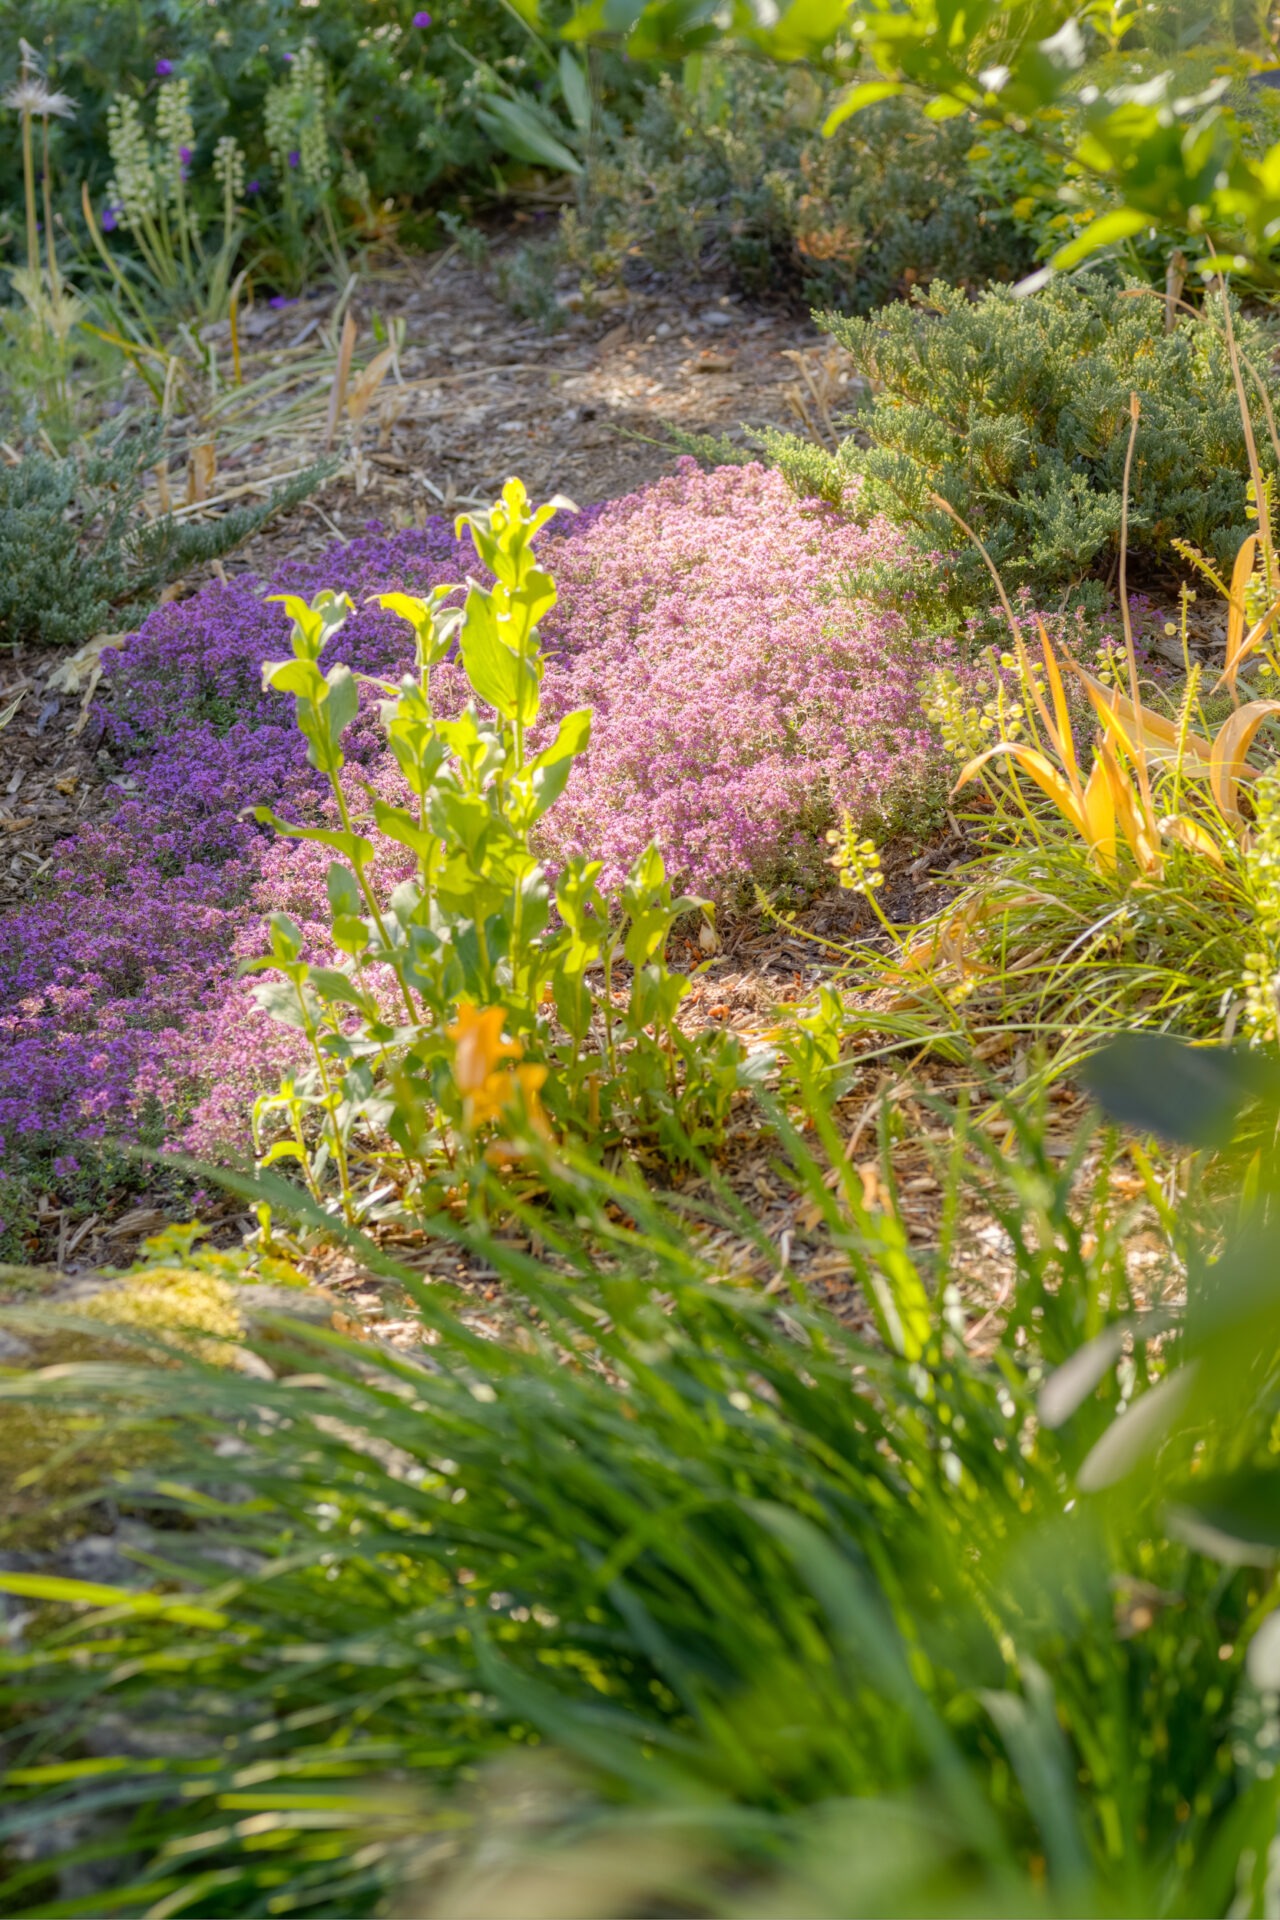 A tranquil garden with sunlight filtering through leaves, highlighting patches of purple flowers, green shrubs, and various other plants in a natural setting.